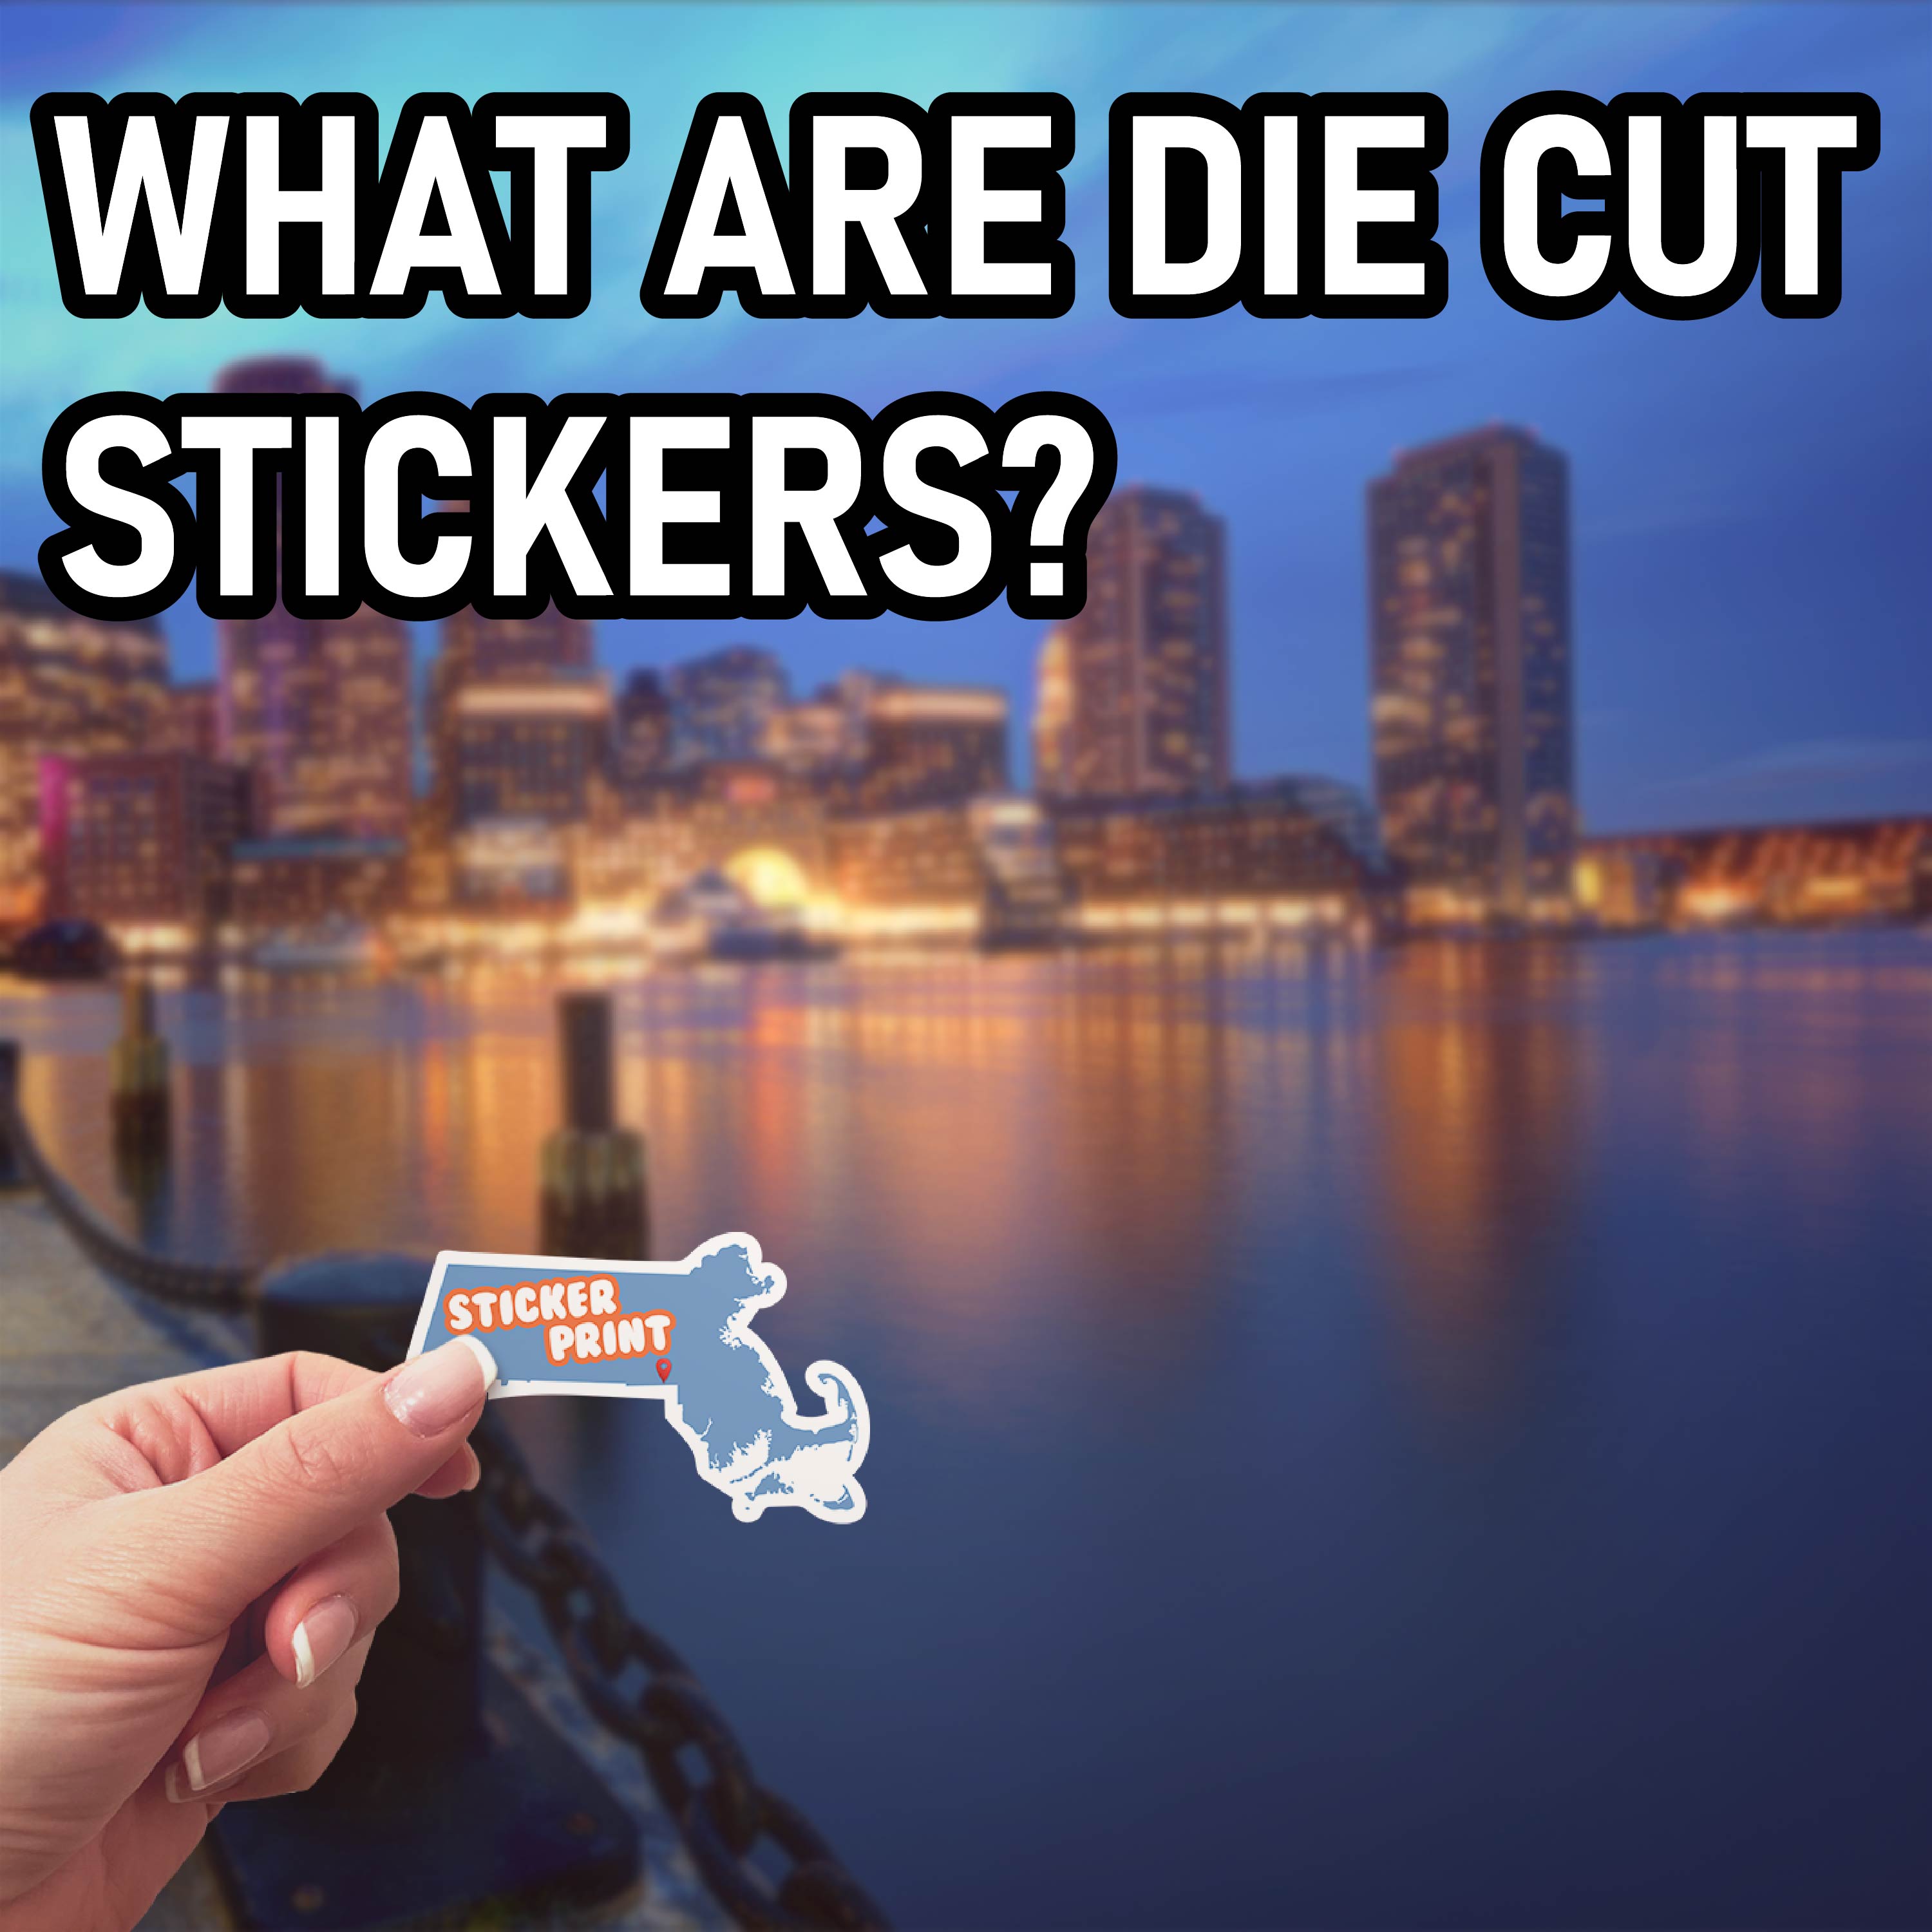 What are die cut stickers?